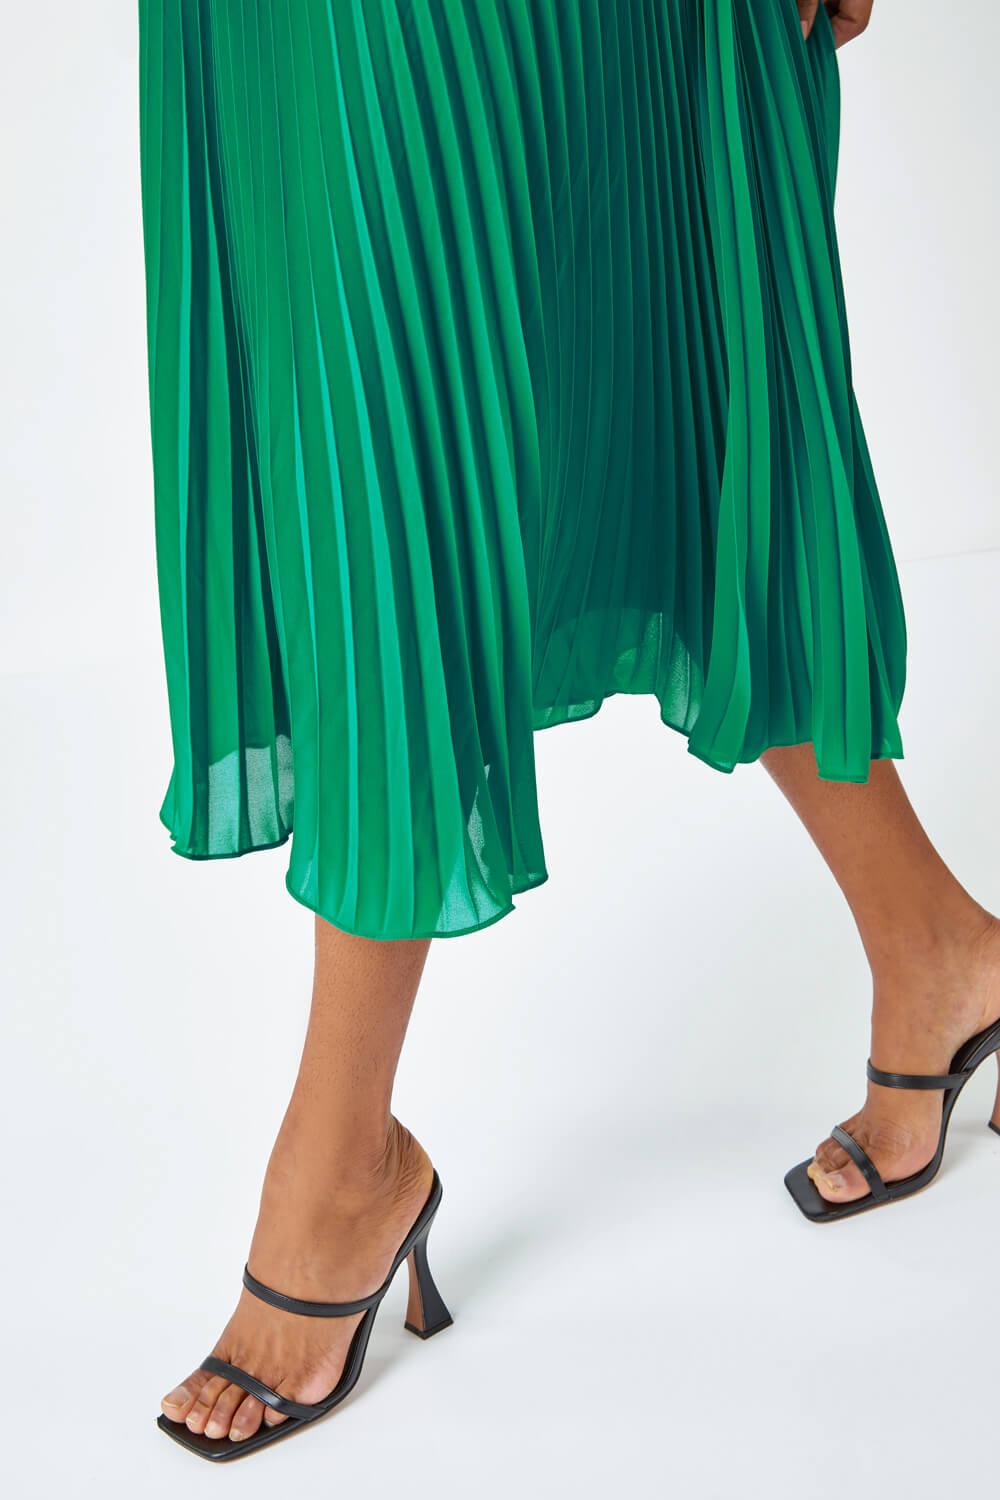 Emerald Lace Top Overlay Pleated Midi Dress, Image 5 of 5